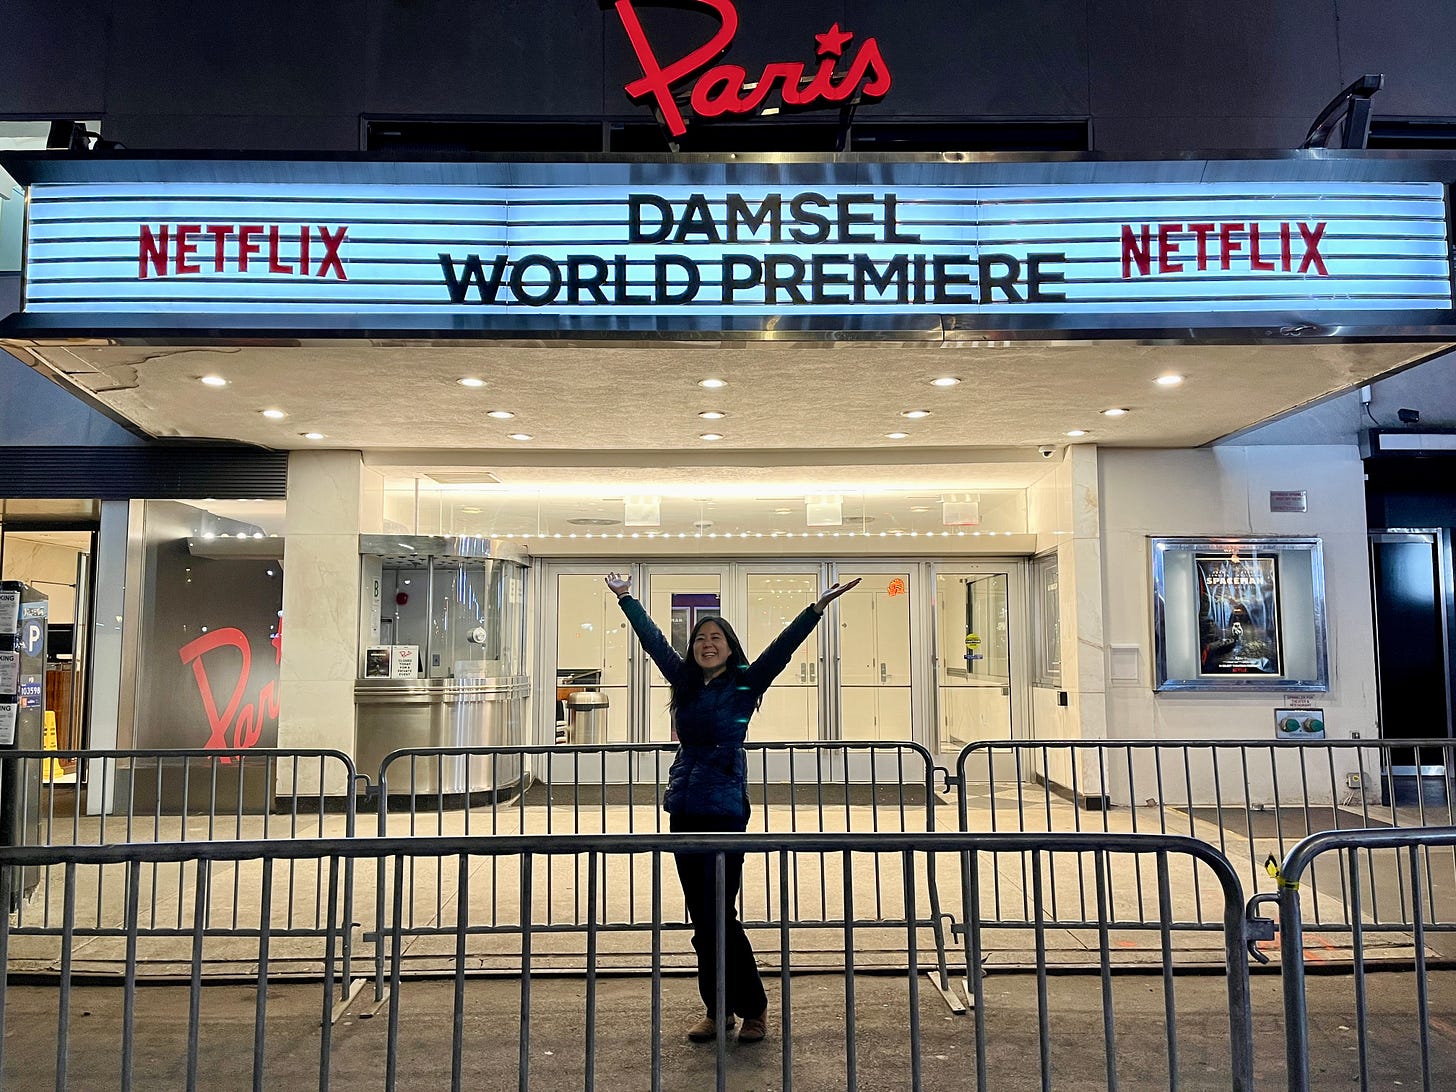 Author Evelyn Skye in New York for the Damsel World Premiere